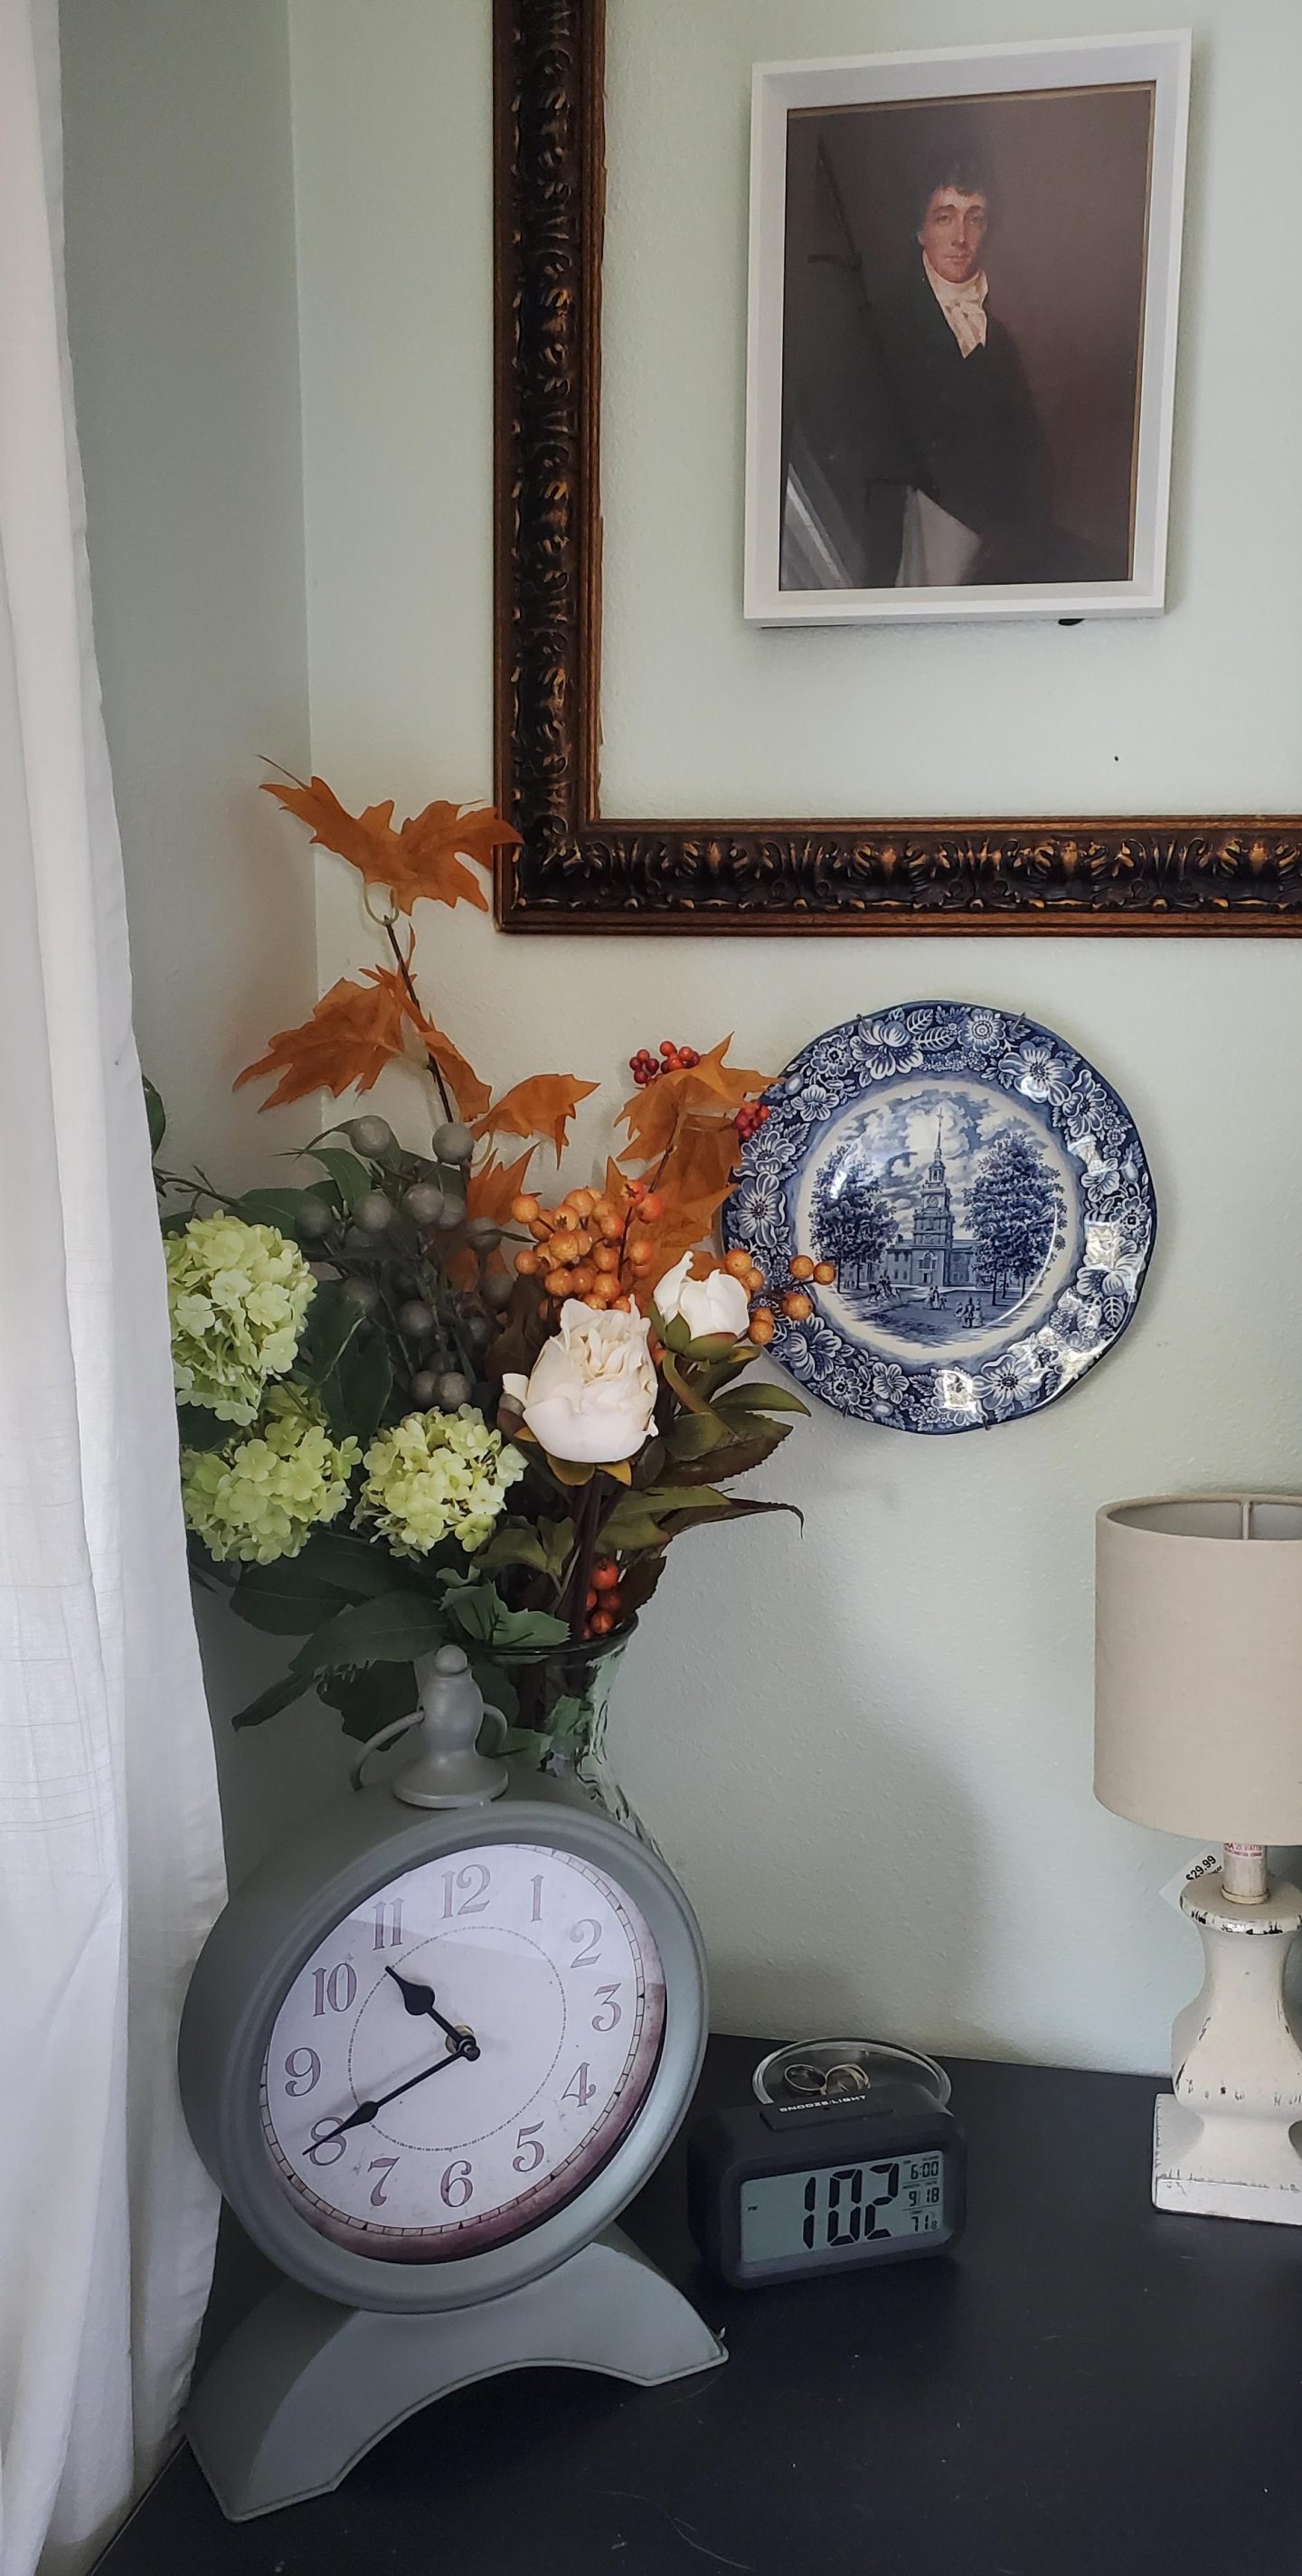 Faux leaves and berries added to bedroom to decorate for fall.